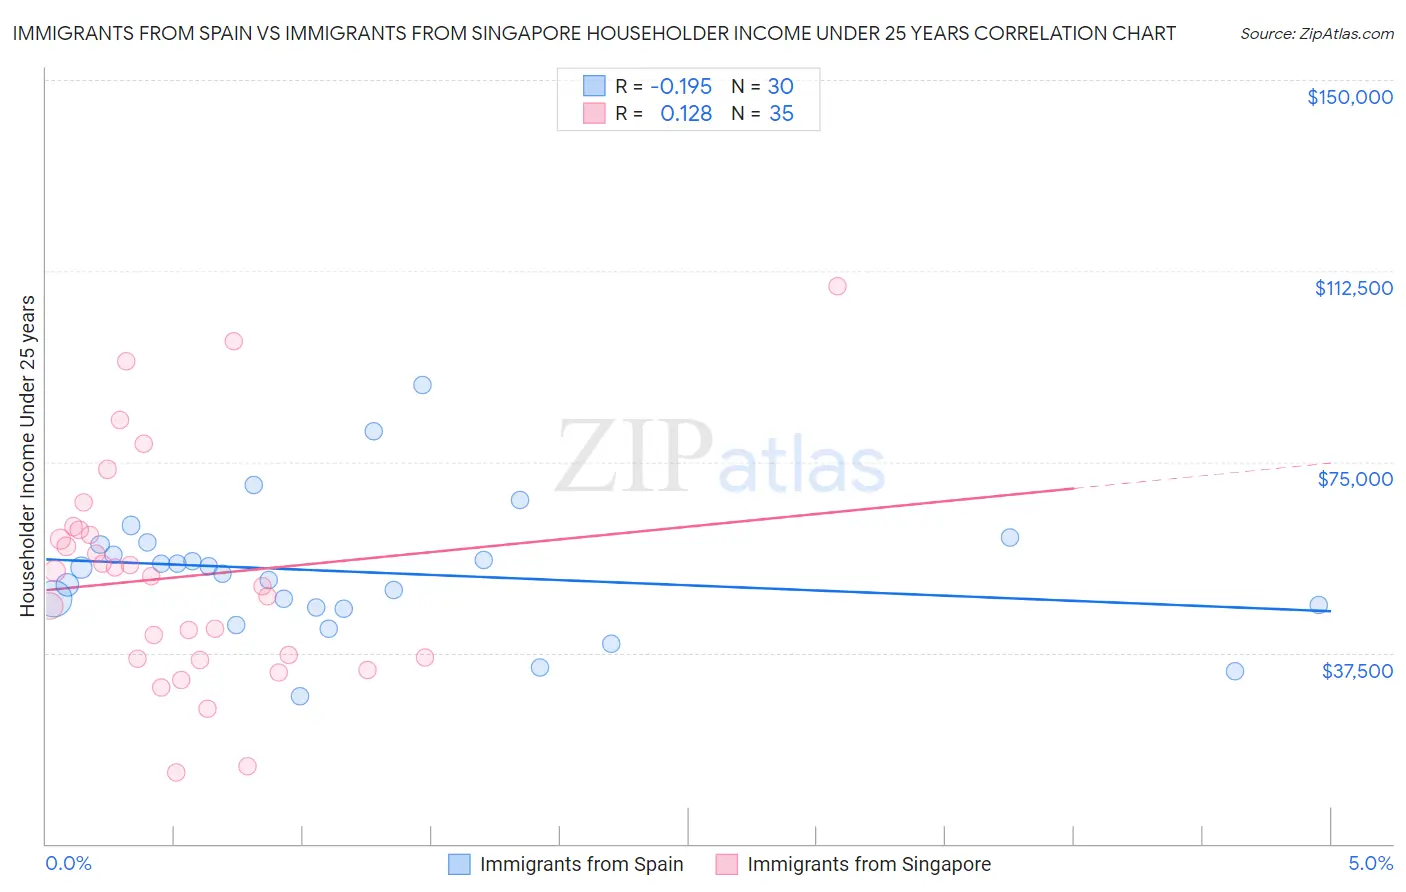 Immigrants from Spain vs Immigrants from Singapore Householder Income Under 25 years